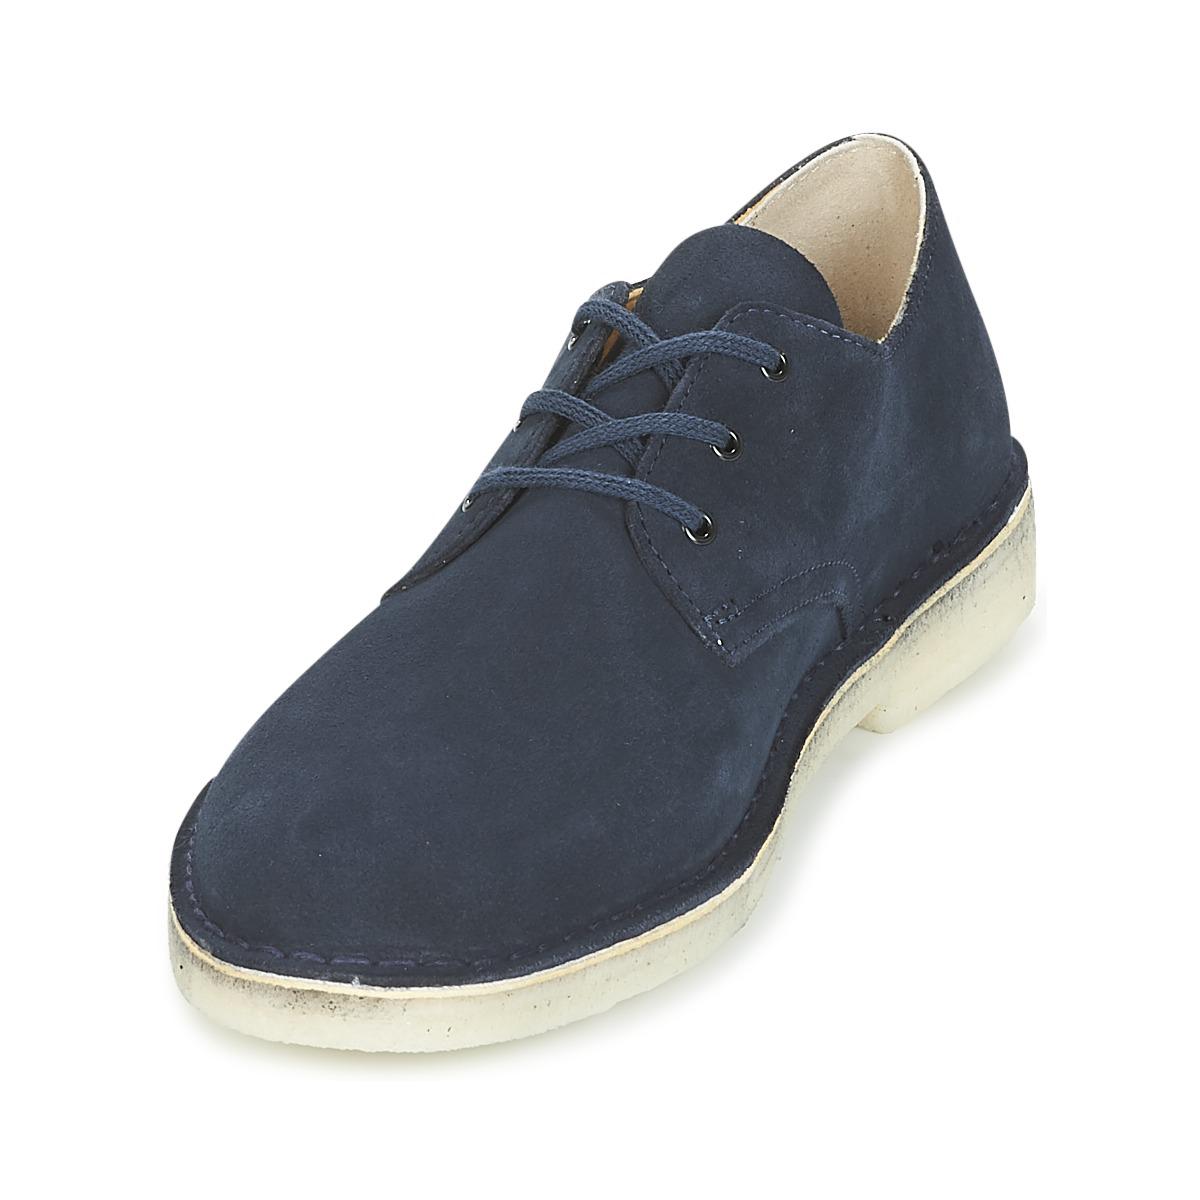 Clarks Desert Crosby Shoes (trainers) in Blue for Men - Lyst